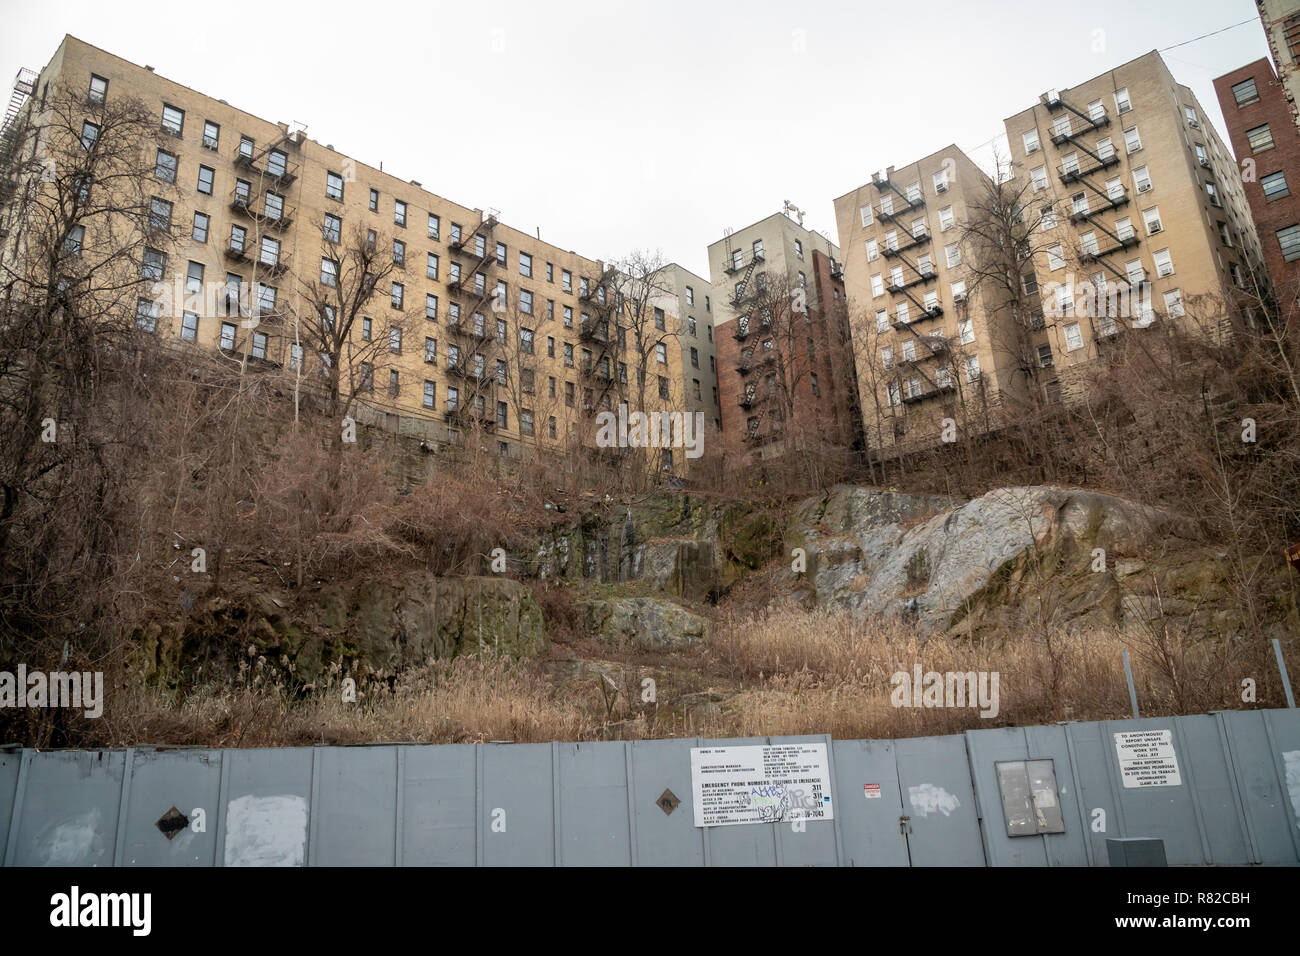 Apartment buildings high on a bluff seen from Overlook Terrace in the densely populated Washington Heights in Upper Manhattan in New York on Saturday, December 8, 2018. (Â© Richard B. Levine) Stock Photo